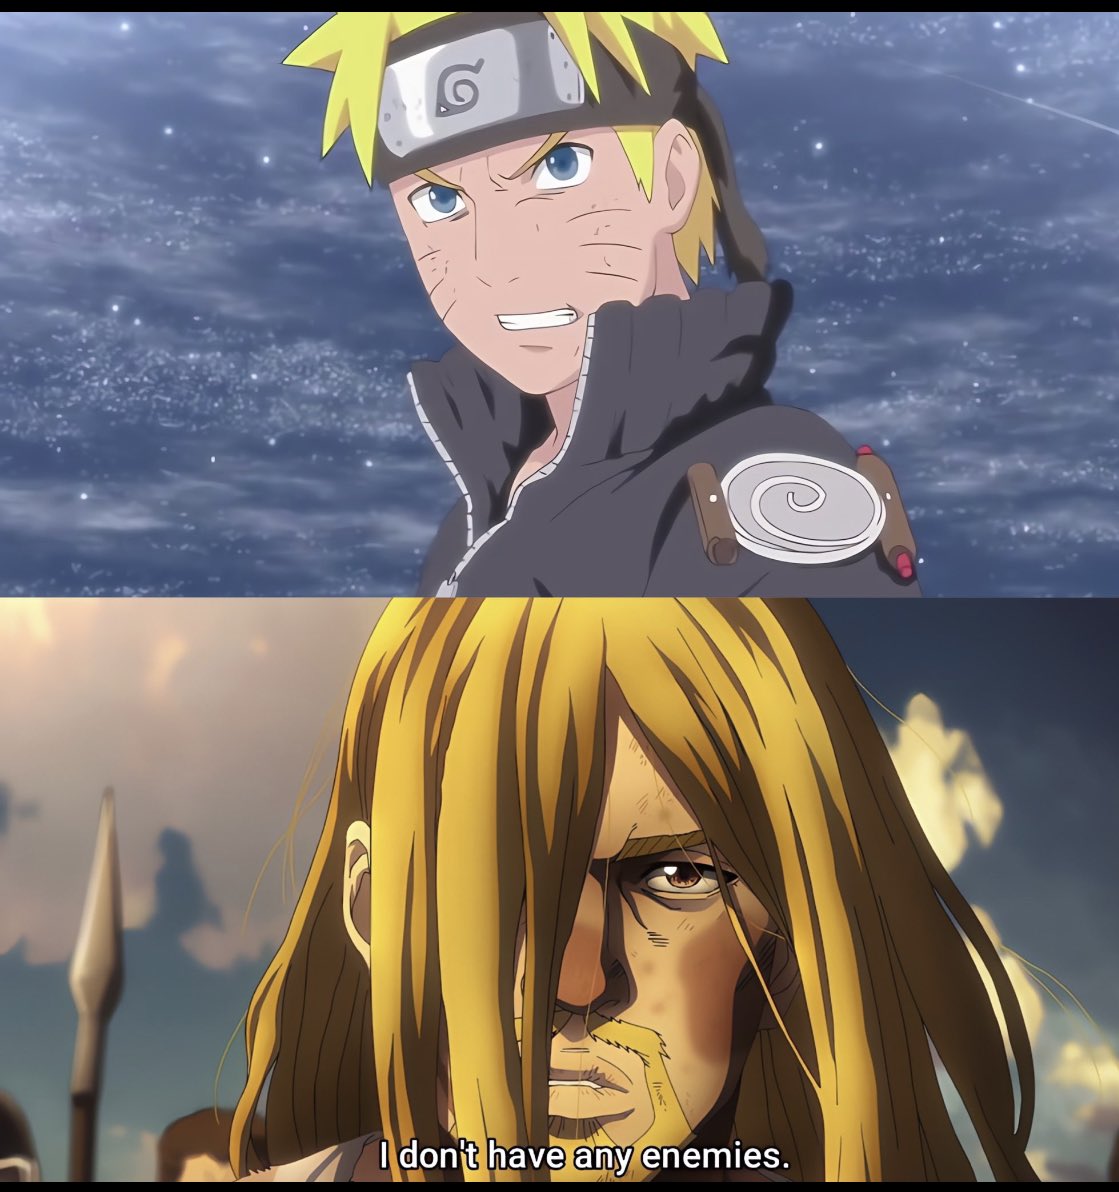 It's funny that Naruto does the EXACT same thing and gets hate for it